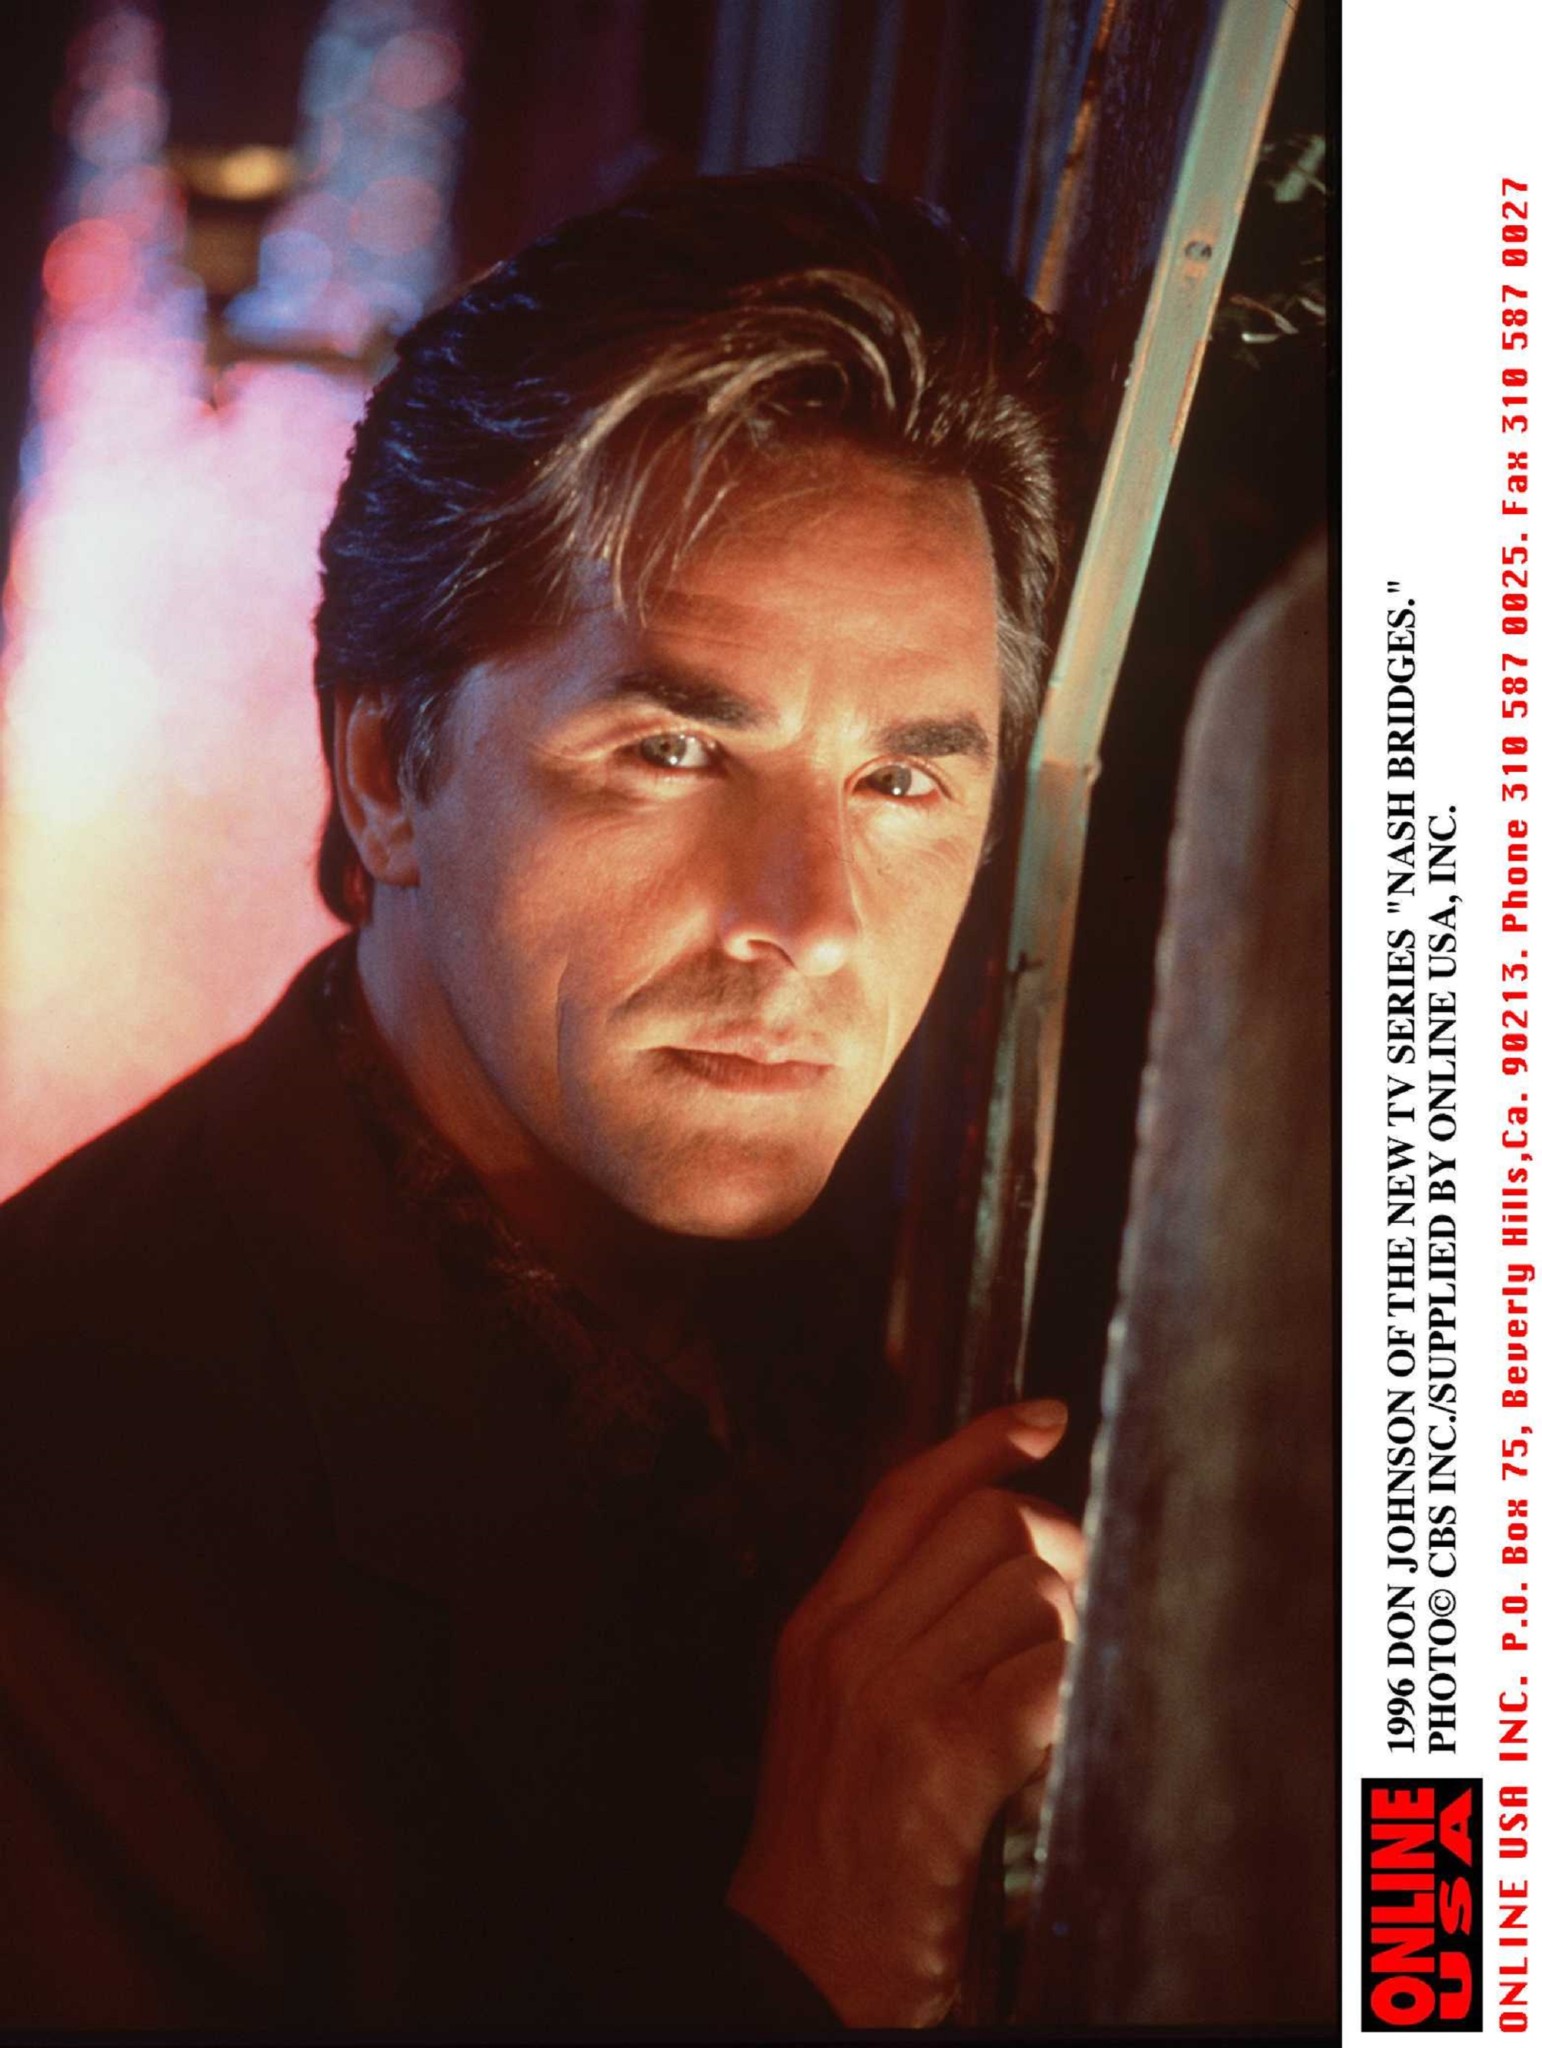 1996 DON JOHNSON OF THE TV SERIES 